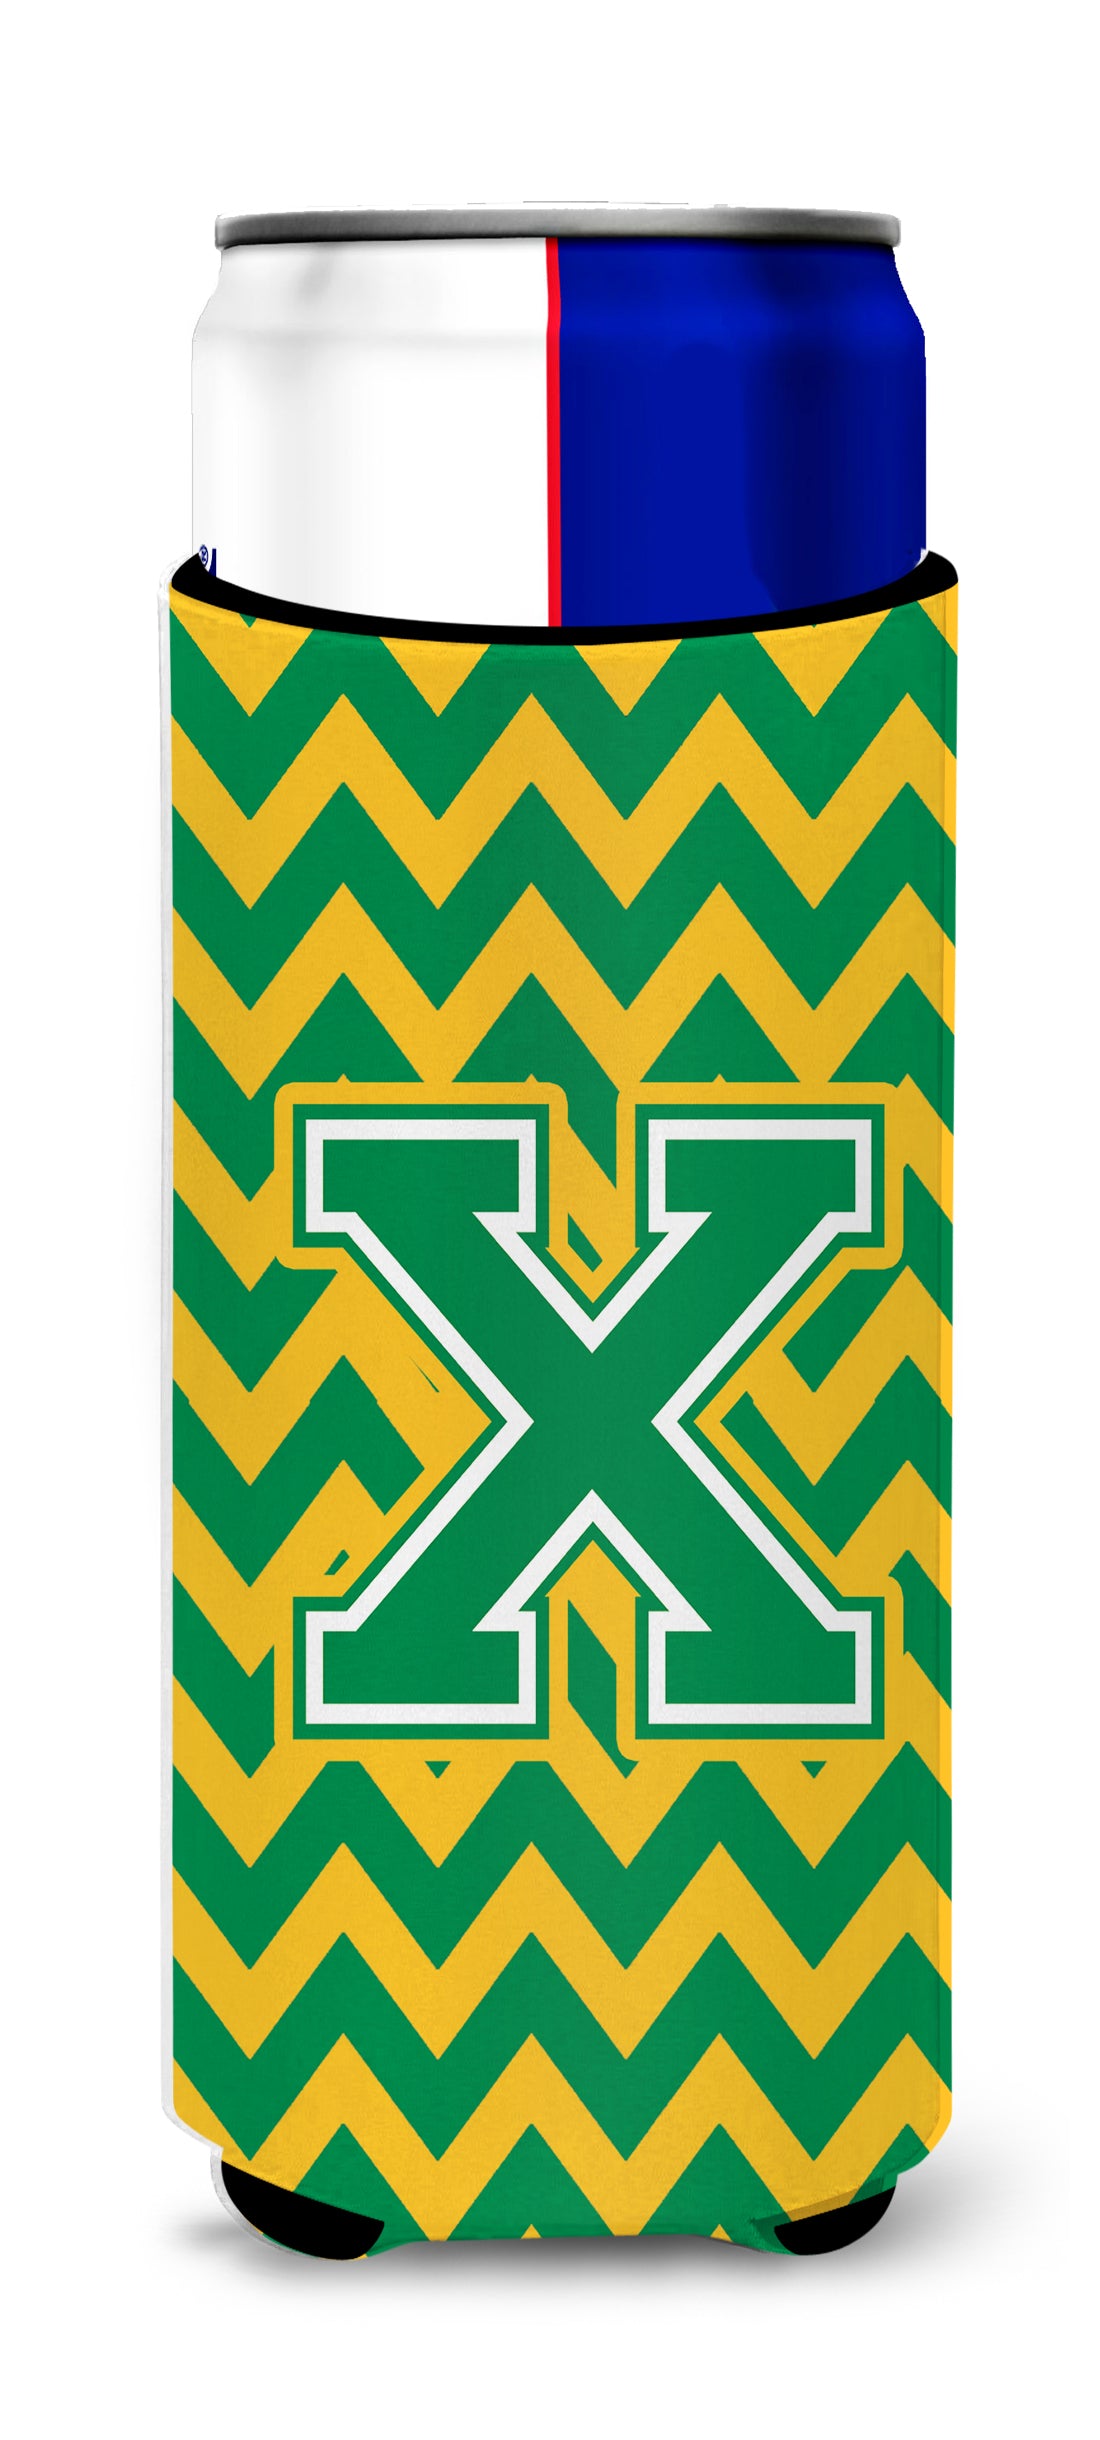 Letter X Chevron Green and Gold Ultra Beverage Insulators for slim cans CJ1059-XMUK.